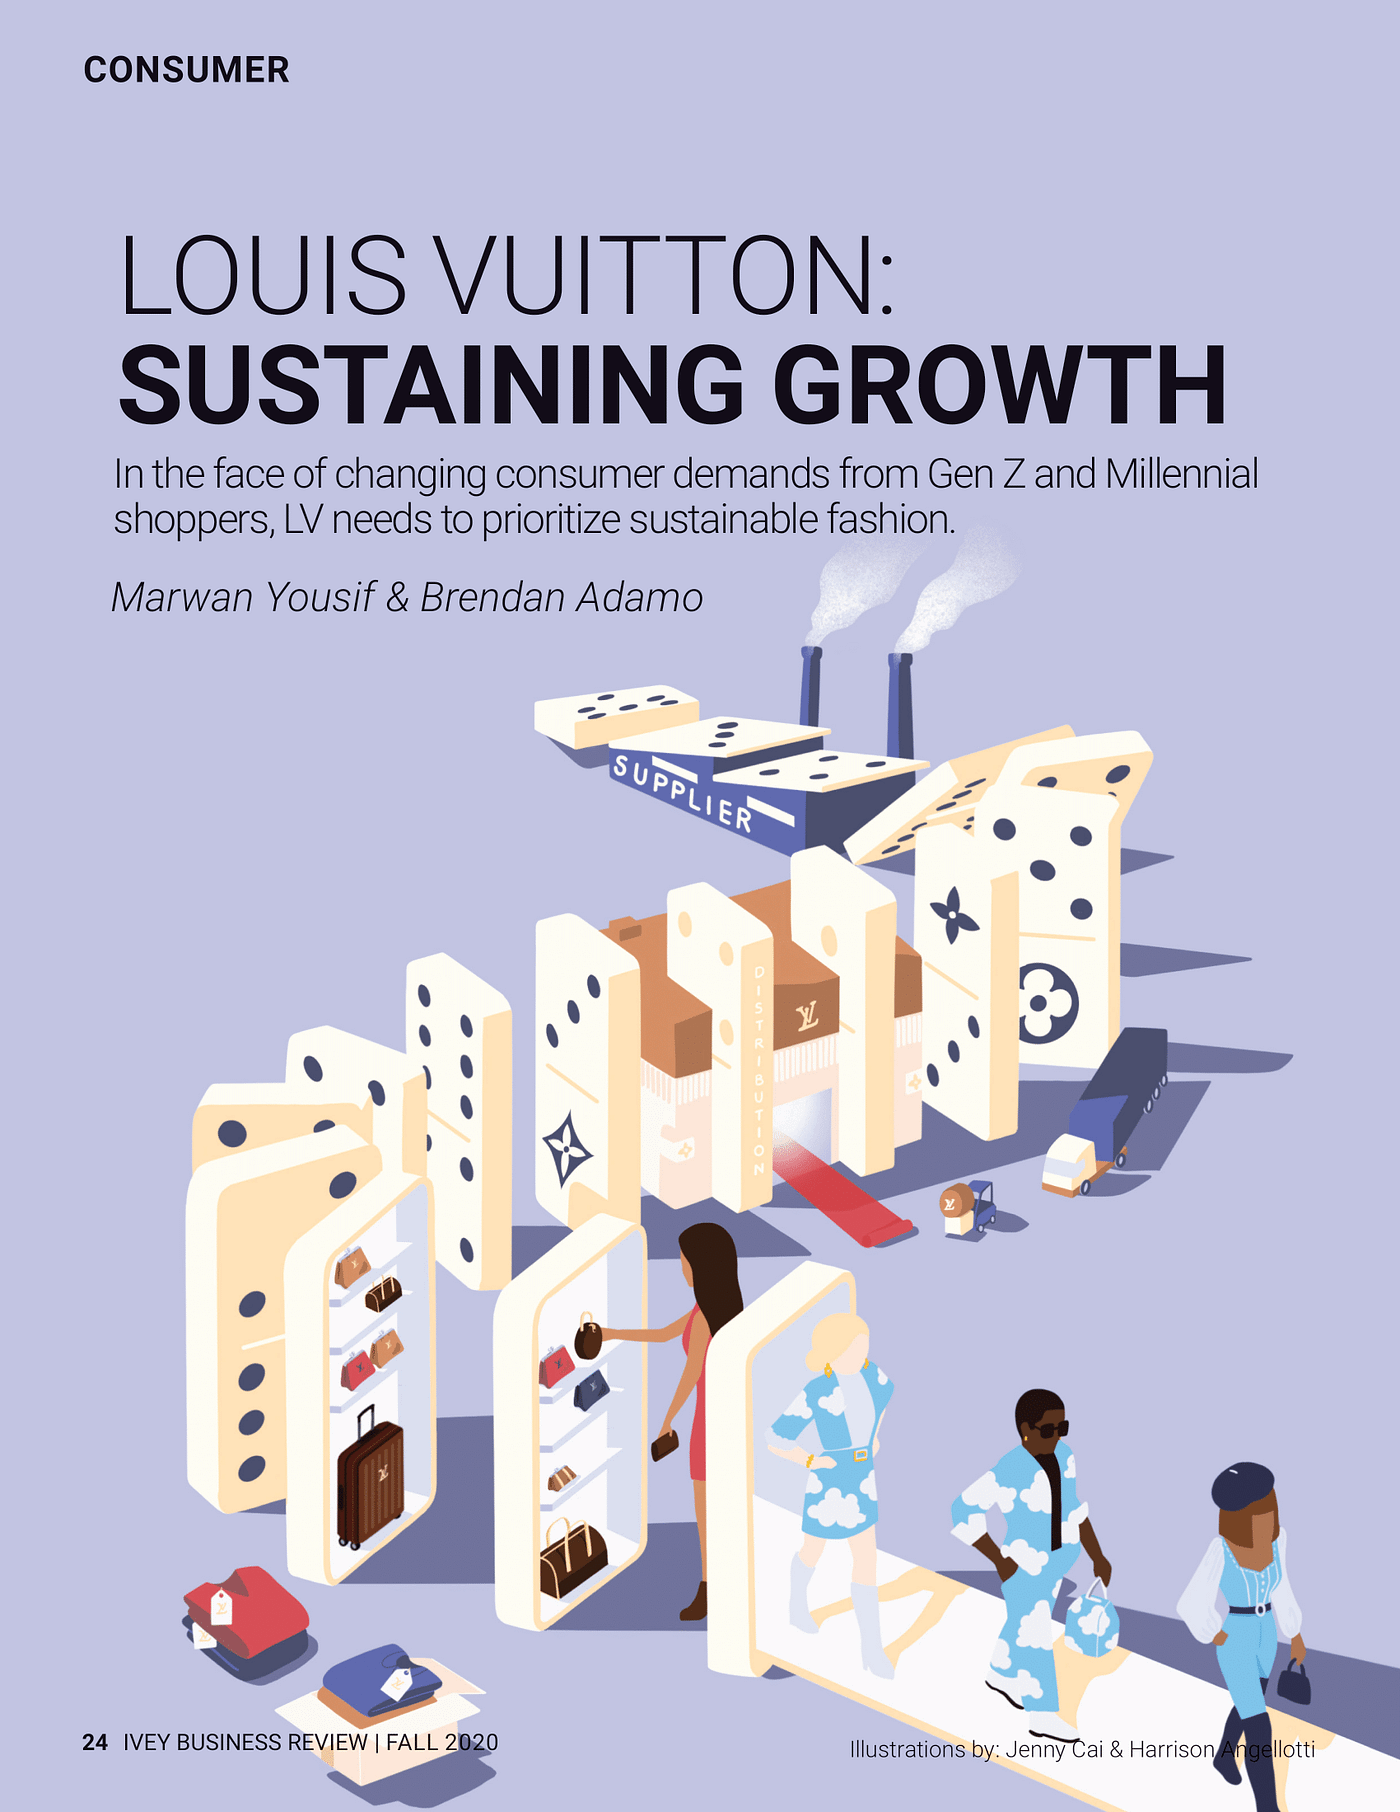 Louis Vuitton: Sustaining Growth. In the face of changing consumer